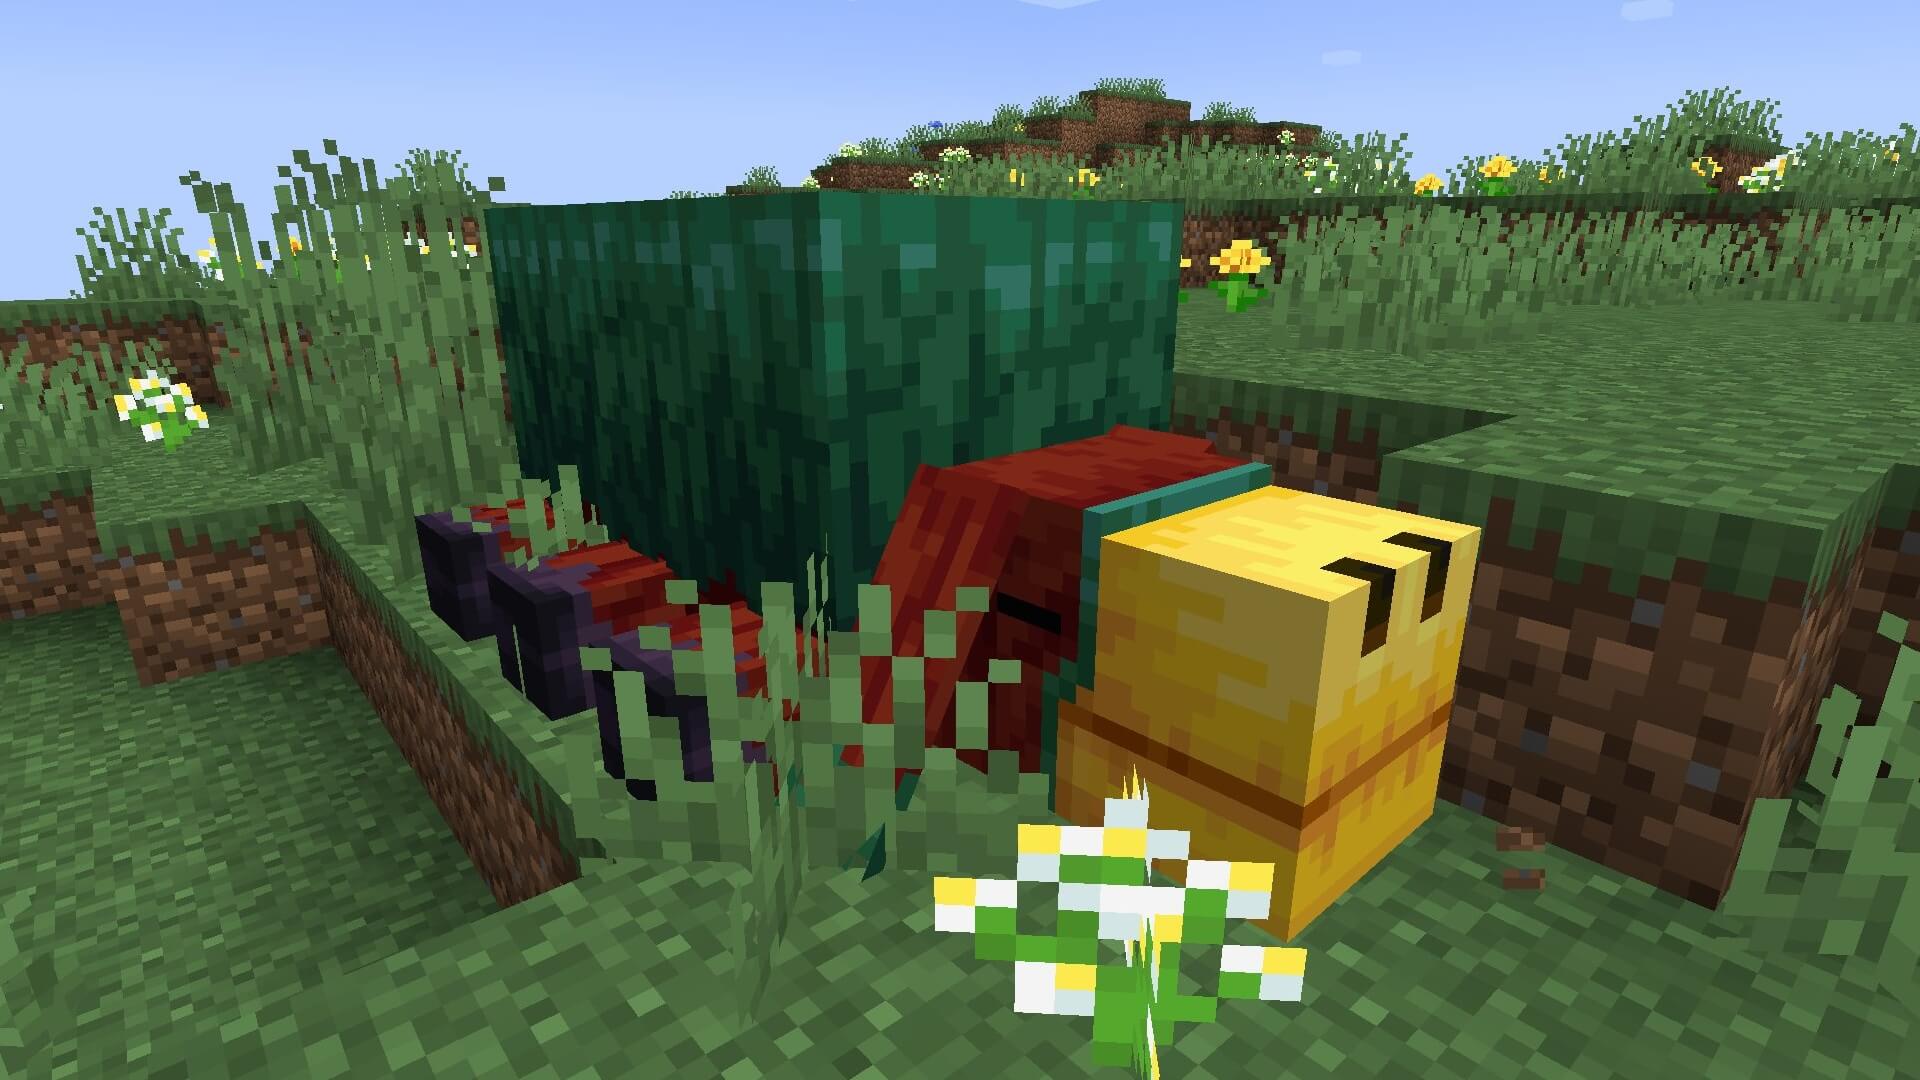 What Is the new Minecraft Sniffer mob?